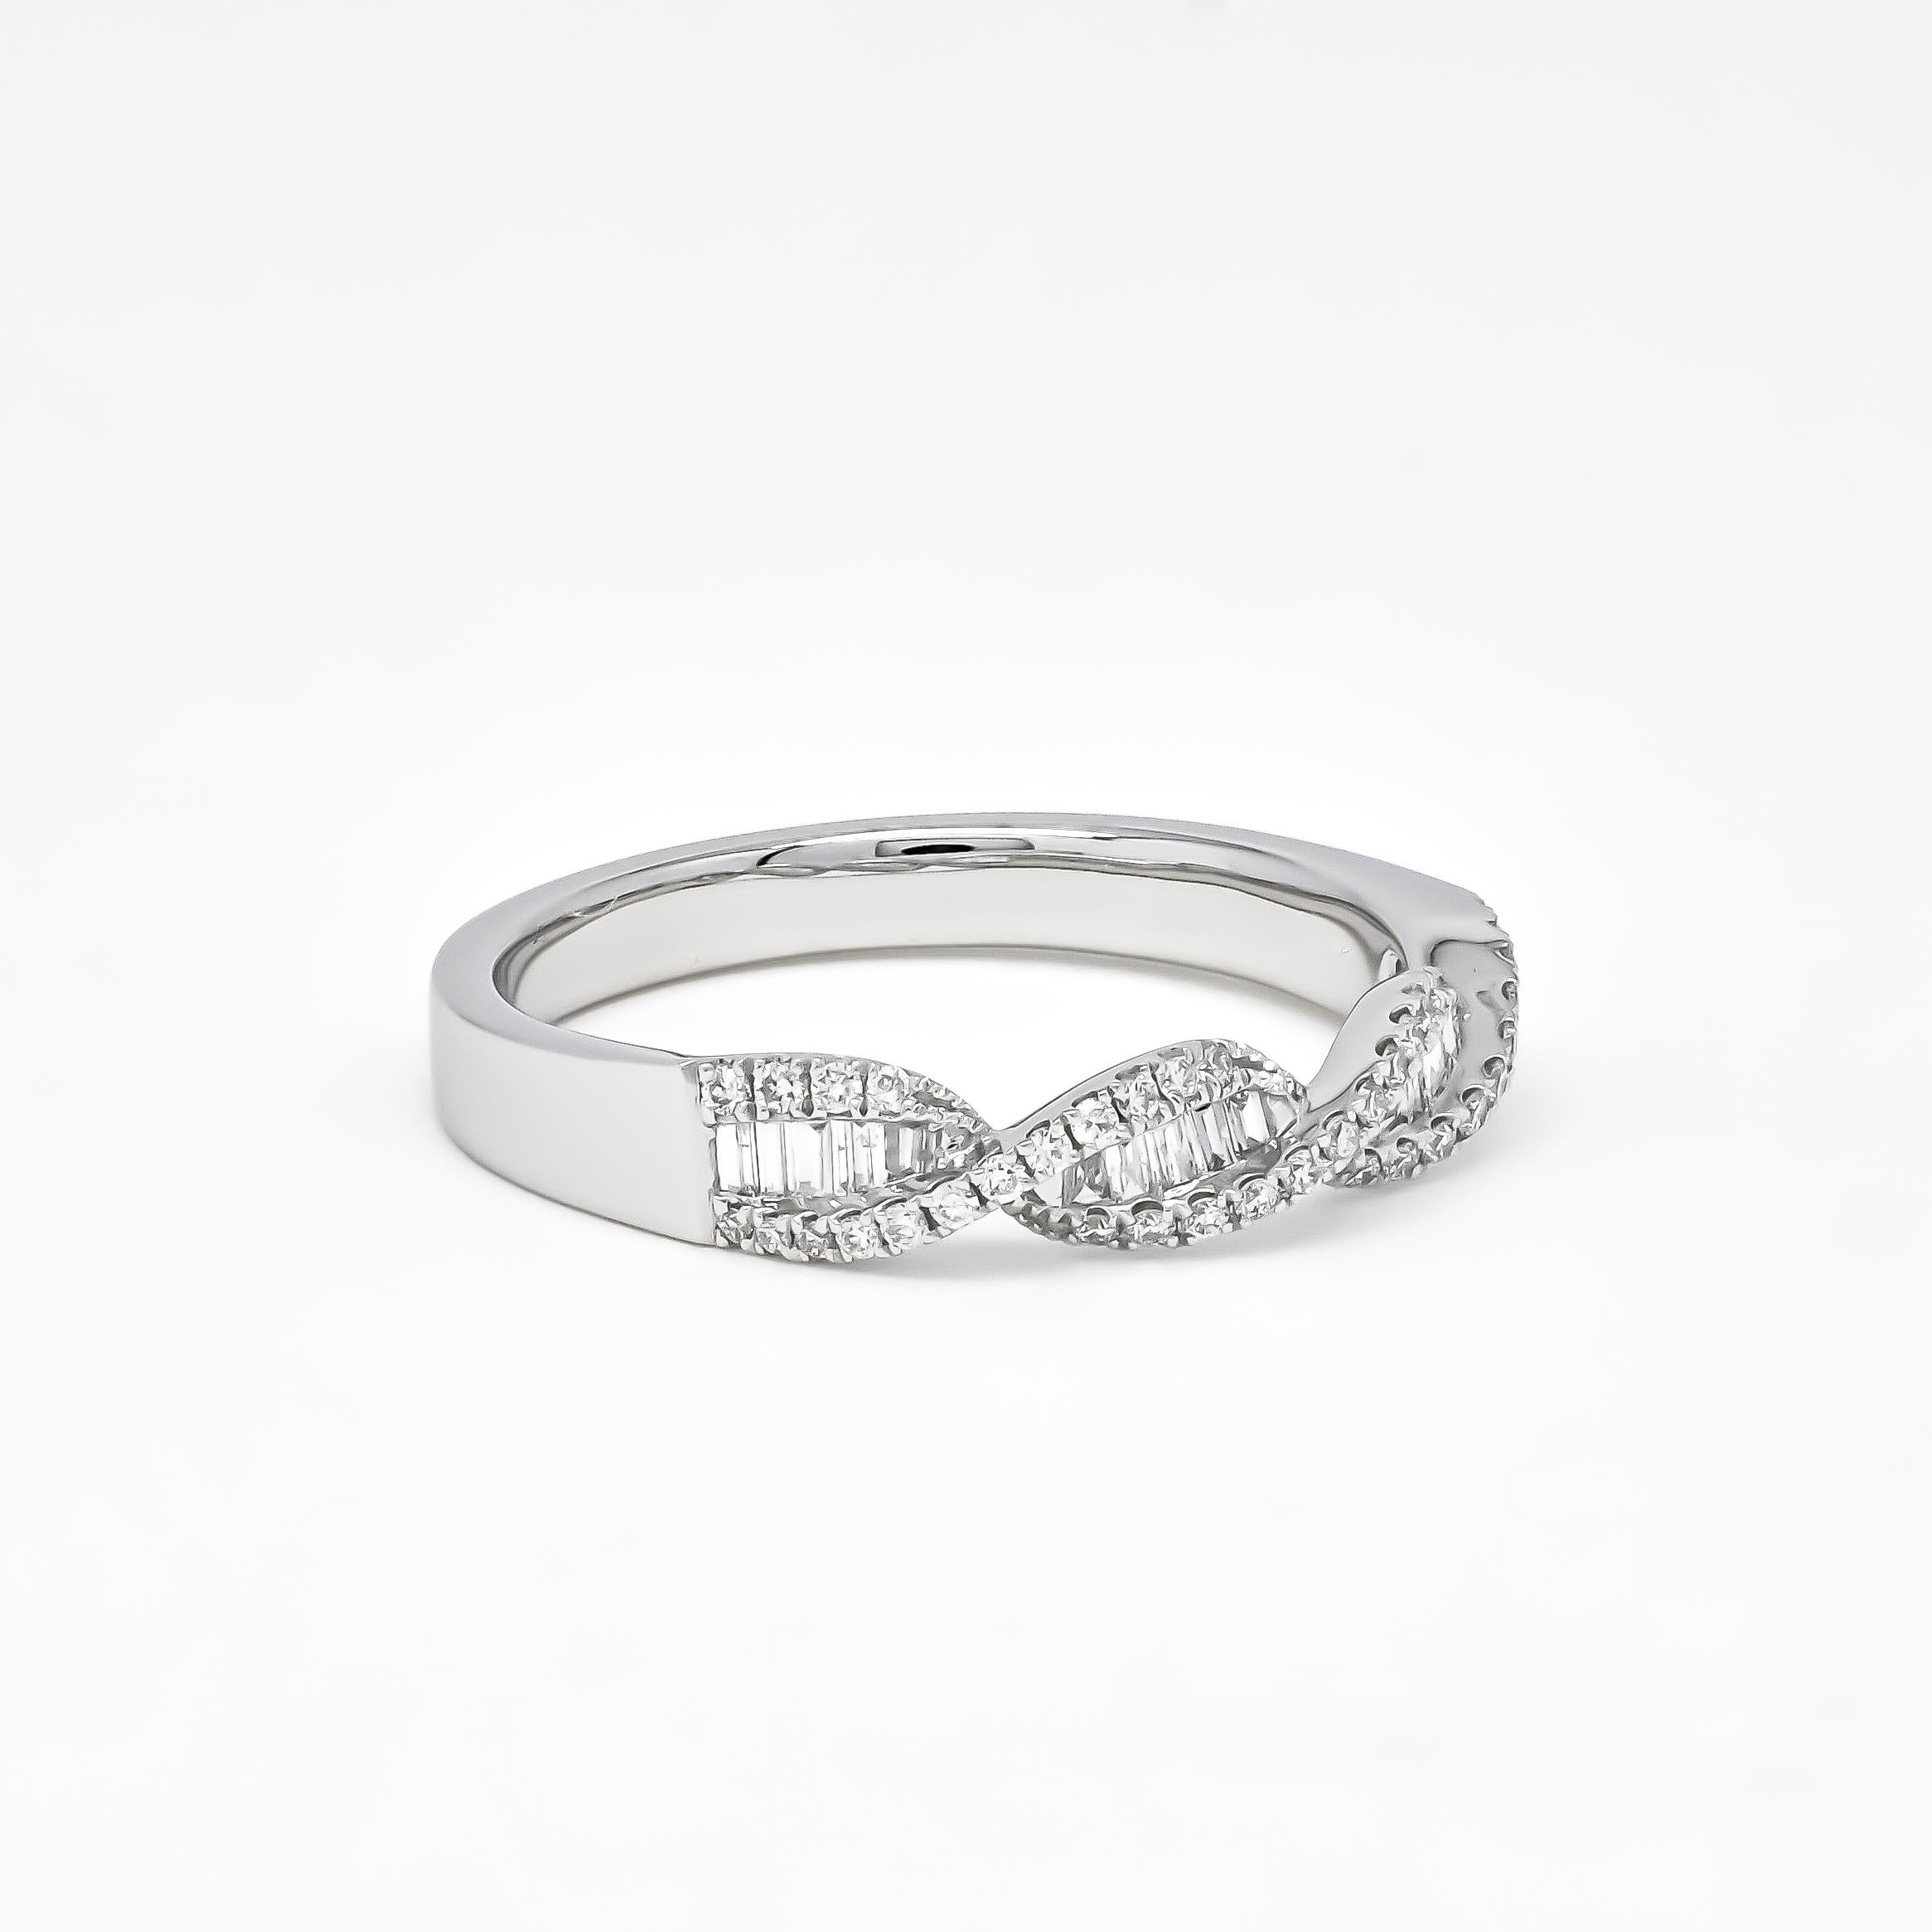 Make an impact with our dynamic DNA Felix fashion Band ring, encrusted with sparkling natural Baguette and Round diamonds.

The diamonds are set in cool DNA Felix 18K rose or yellow gold or white gold polished to a breathtaking luster.

Take note of